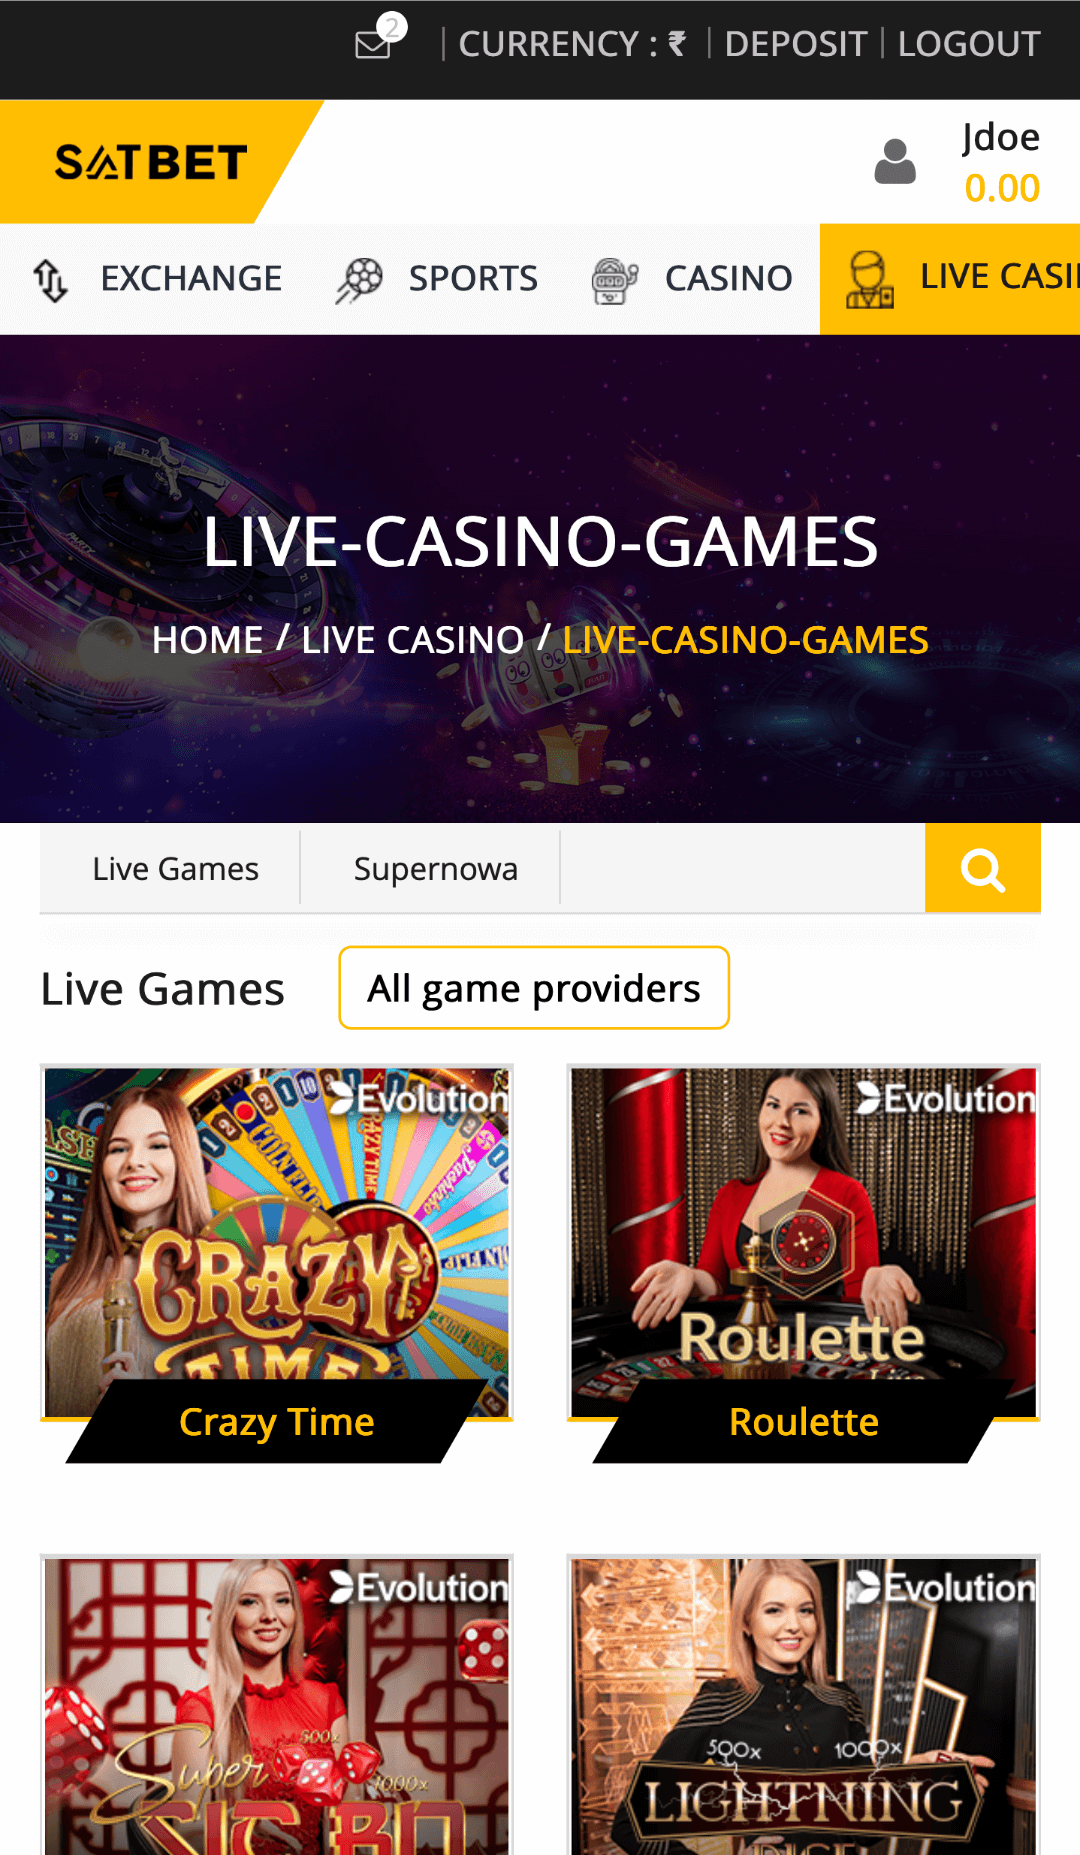 Live casino tab in the Satbet mobile application